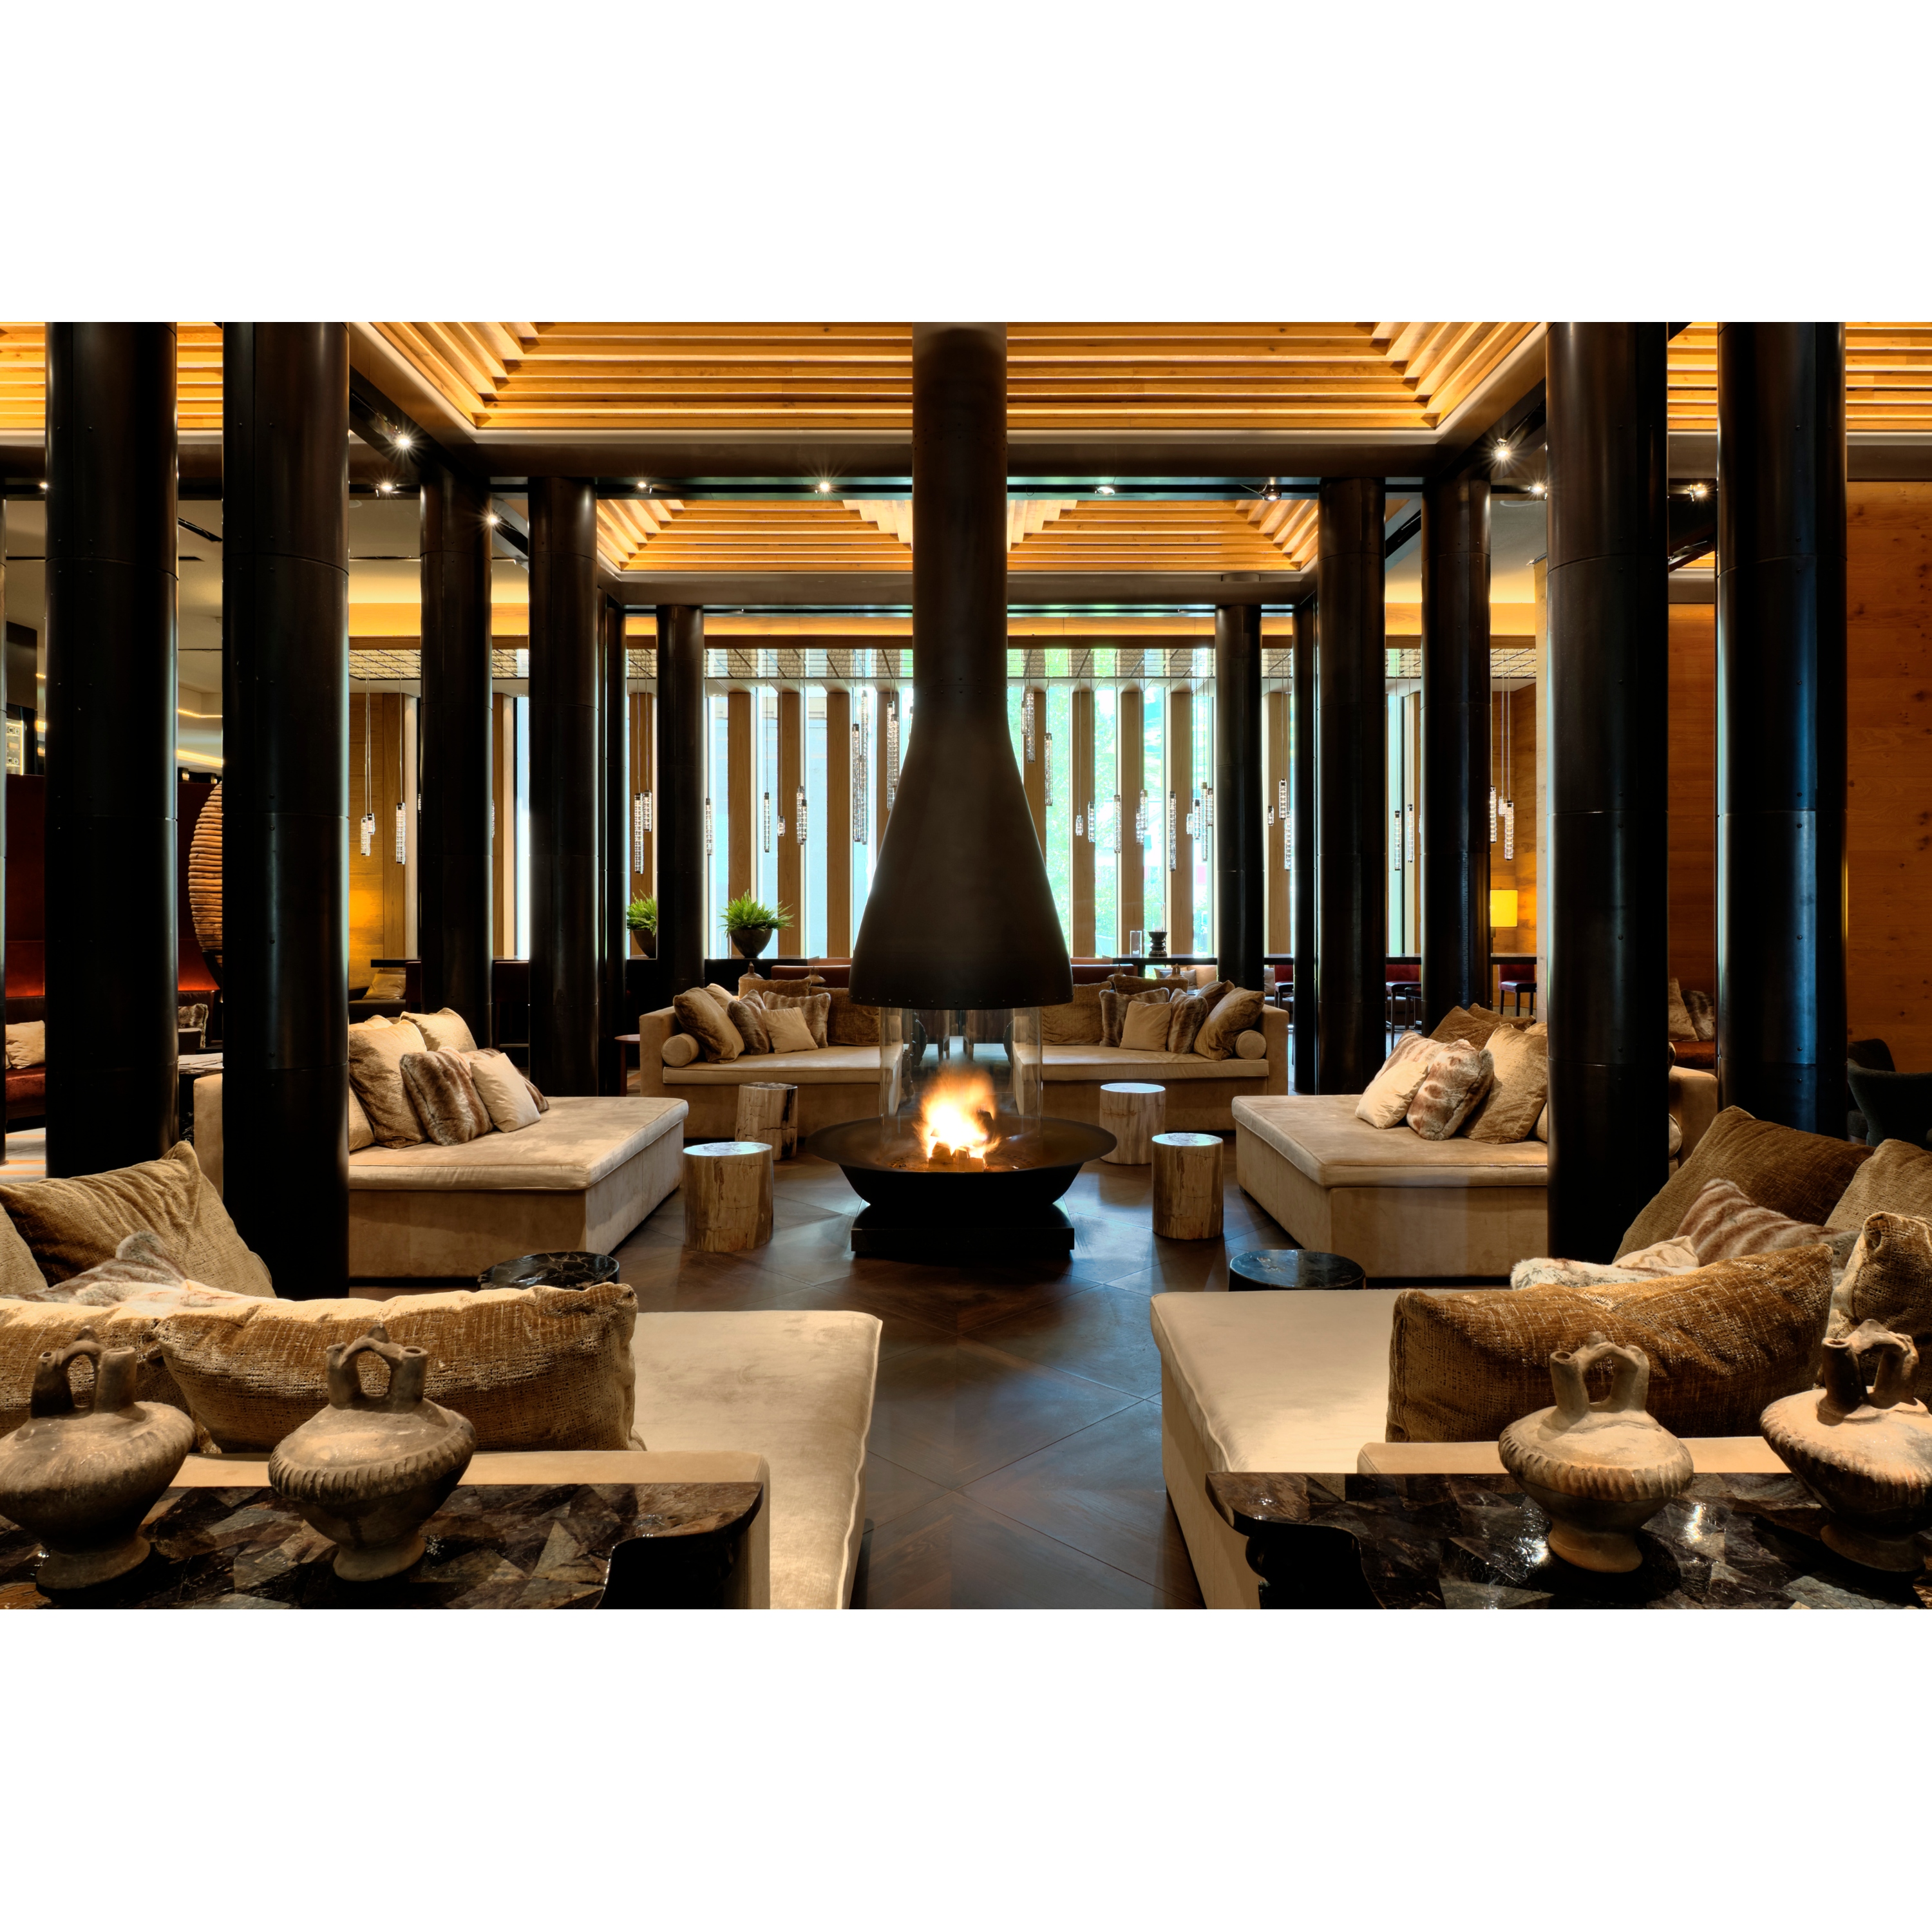 Seating area with fireplace at the lobby inside the Chedi Andermatt Swiss Alps.